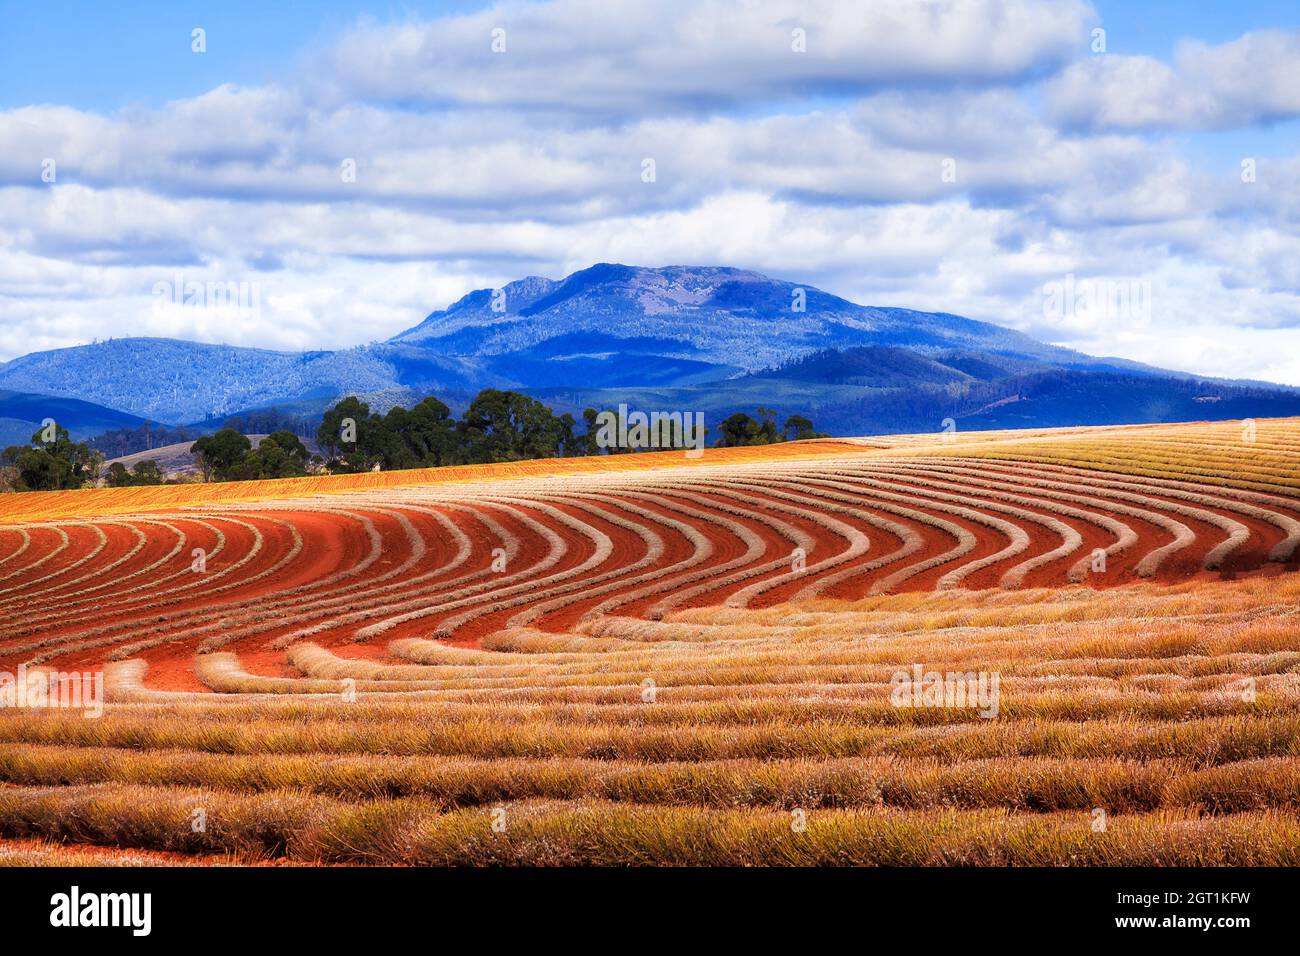 Spirals of Lavender rows on red soil of Lavender farm in rural Tasmania against distant mountain. Stock Photo